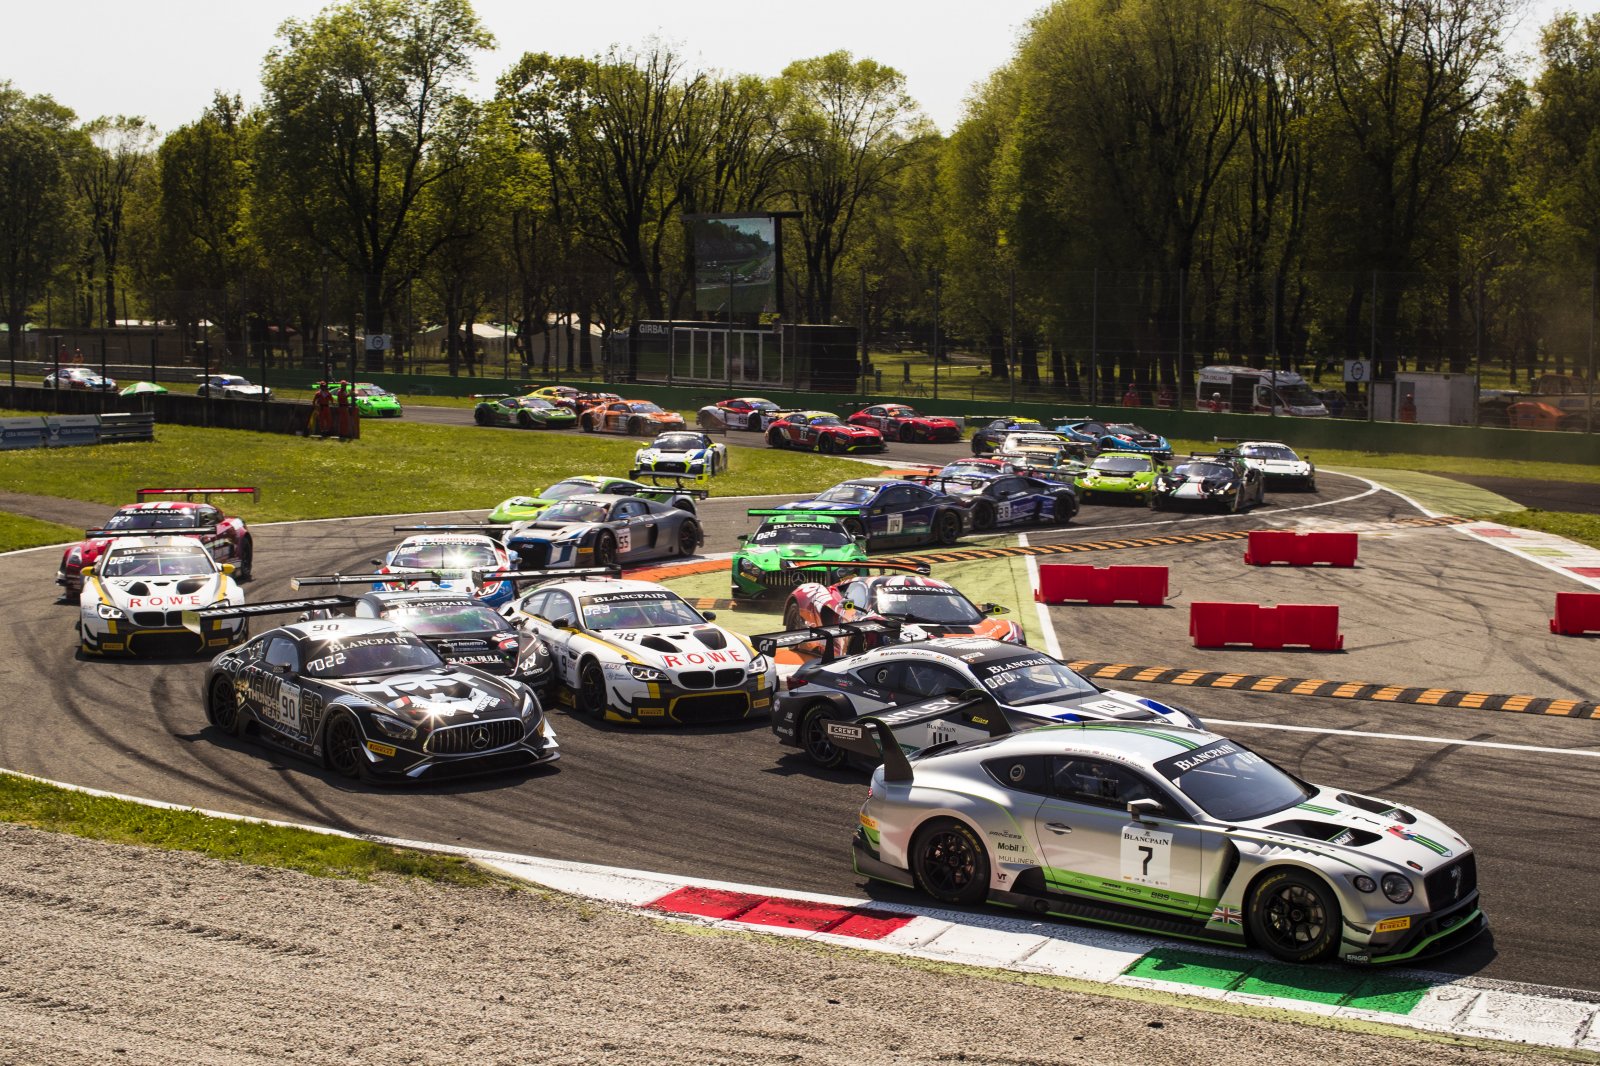 Pengeudlån Airfield Turist BENTLEY MOTORSPORT ANNOUNCES EXPANDED ENDURANCE PROGRAMME FOR 2019 |  Fanatec GT World Challenge Europe Powered by AWS